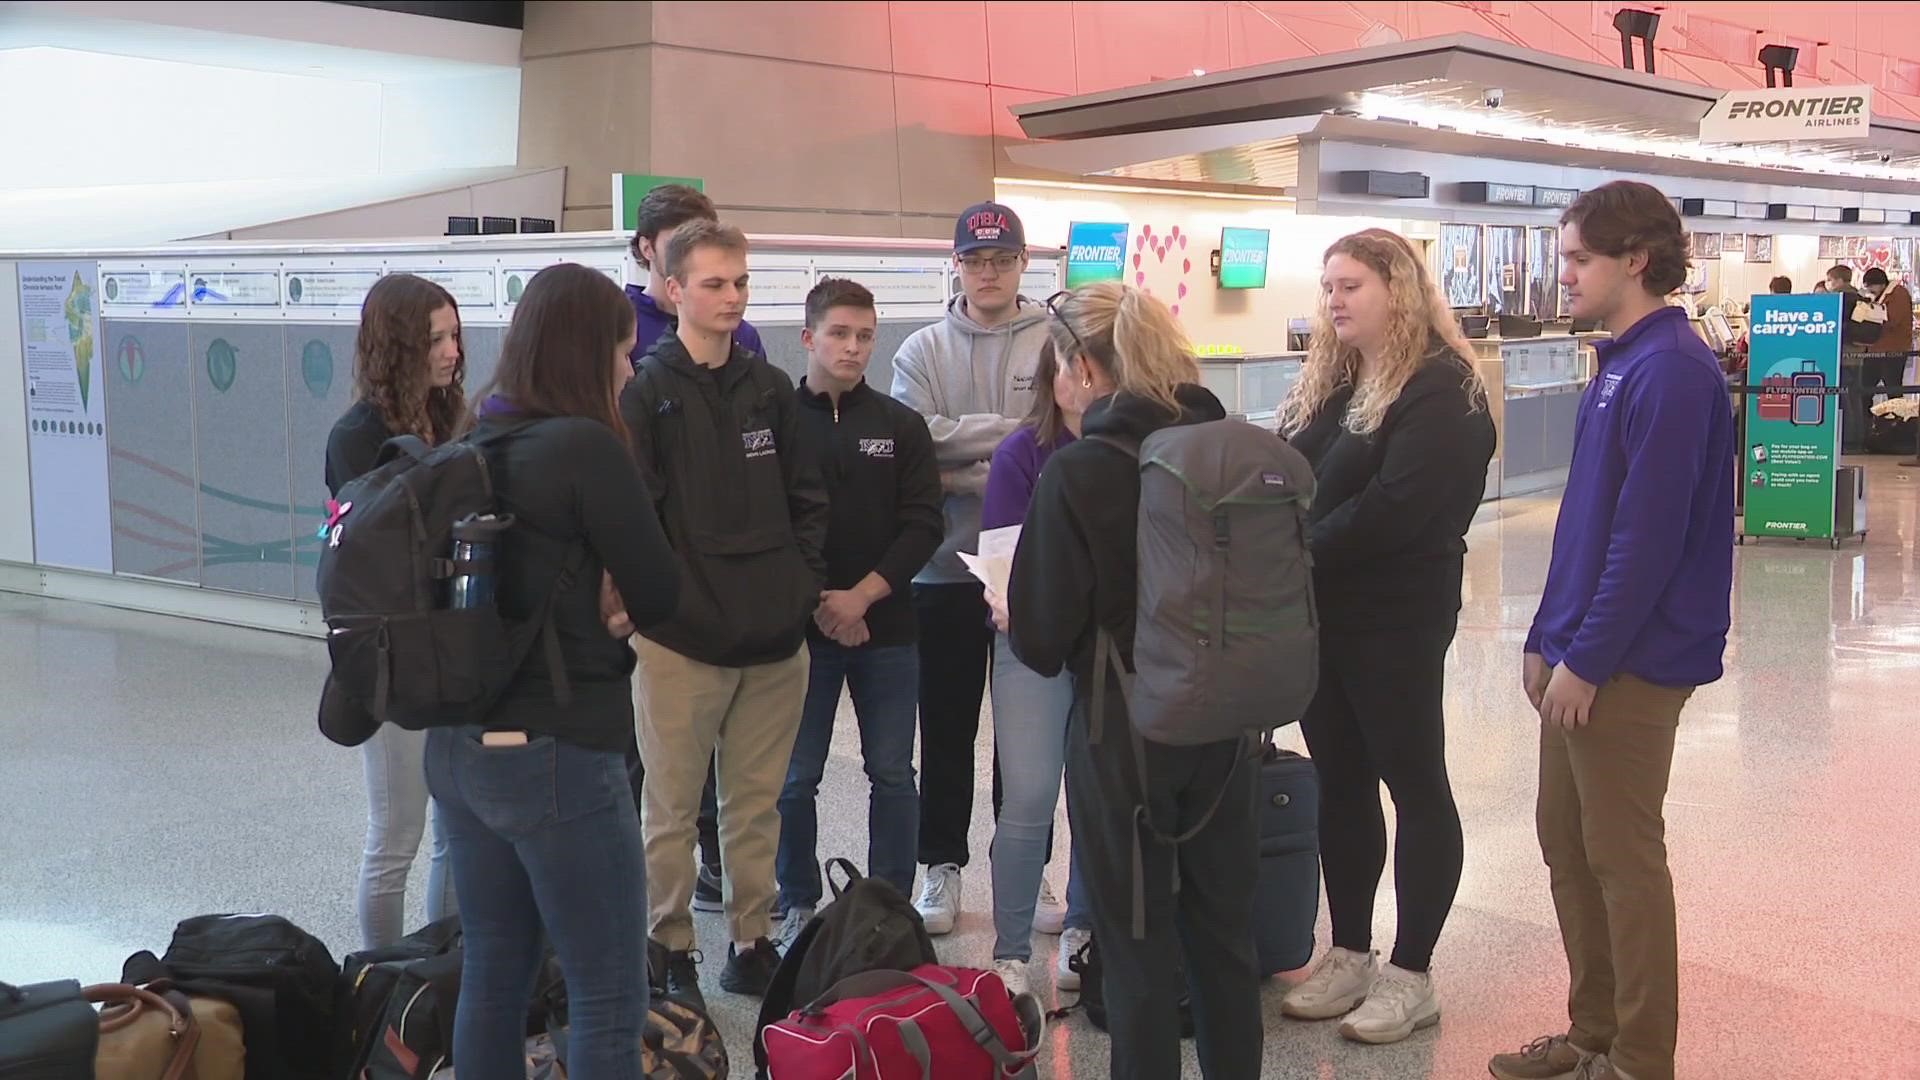 NU students heading to Arizona for Superbowl